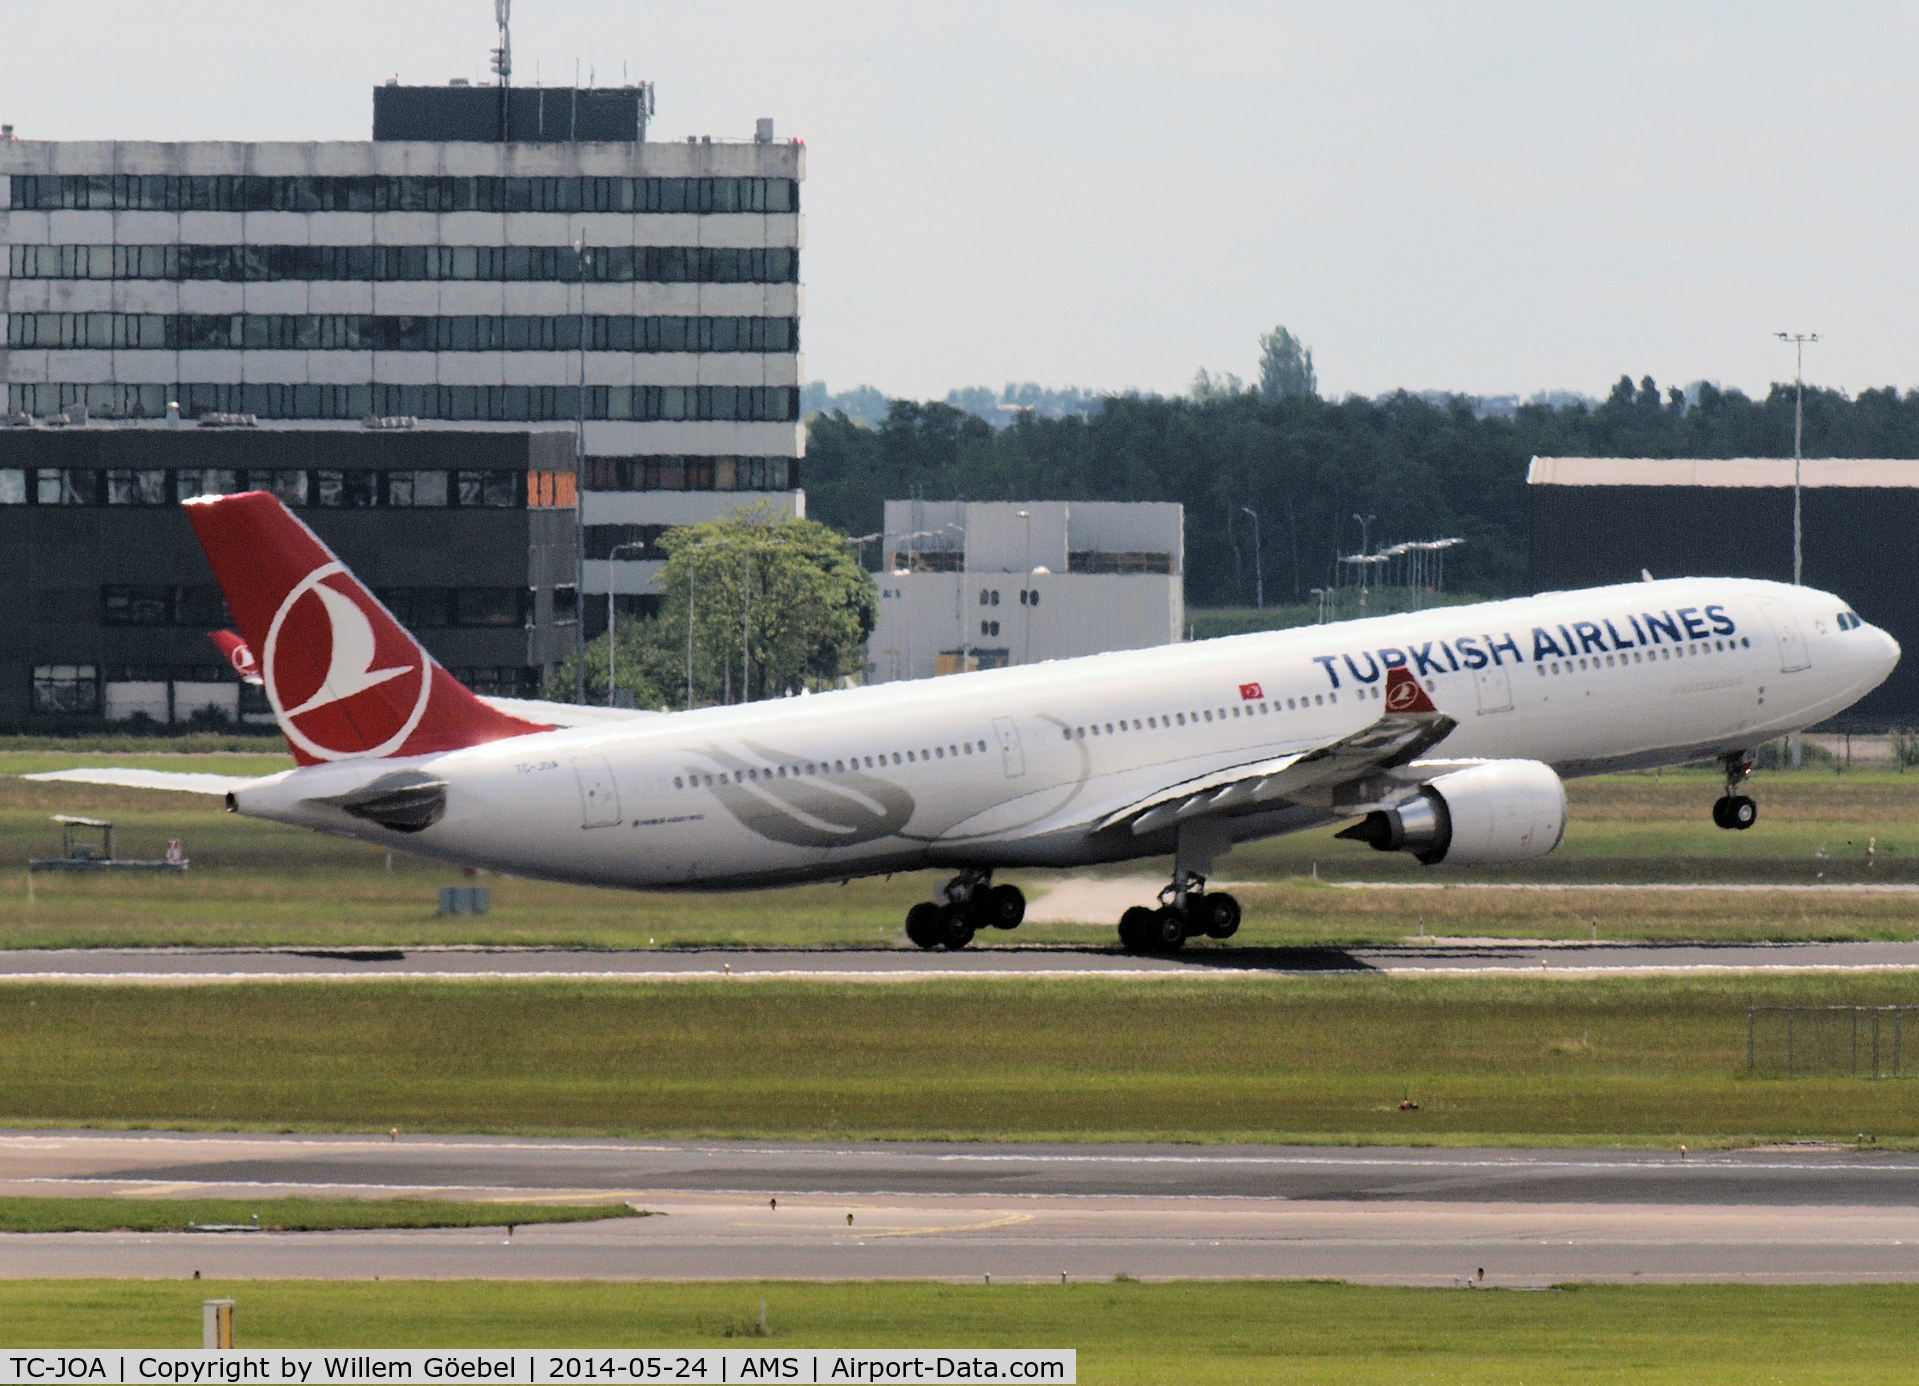 TC-JOA, 2014 Airbus A330-303 C/N 1501, Take of from runway L18 of Schiphol Airport